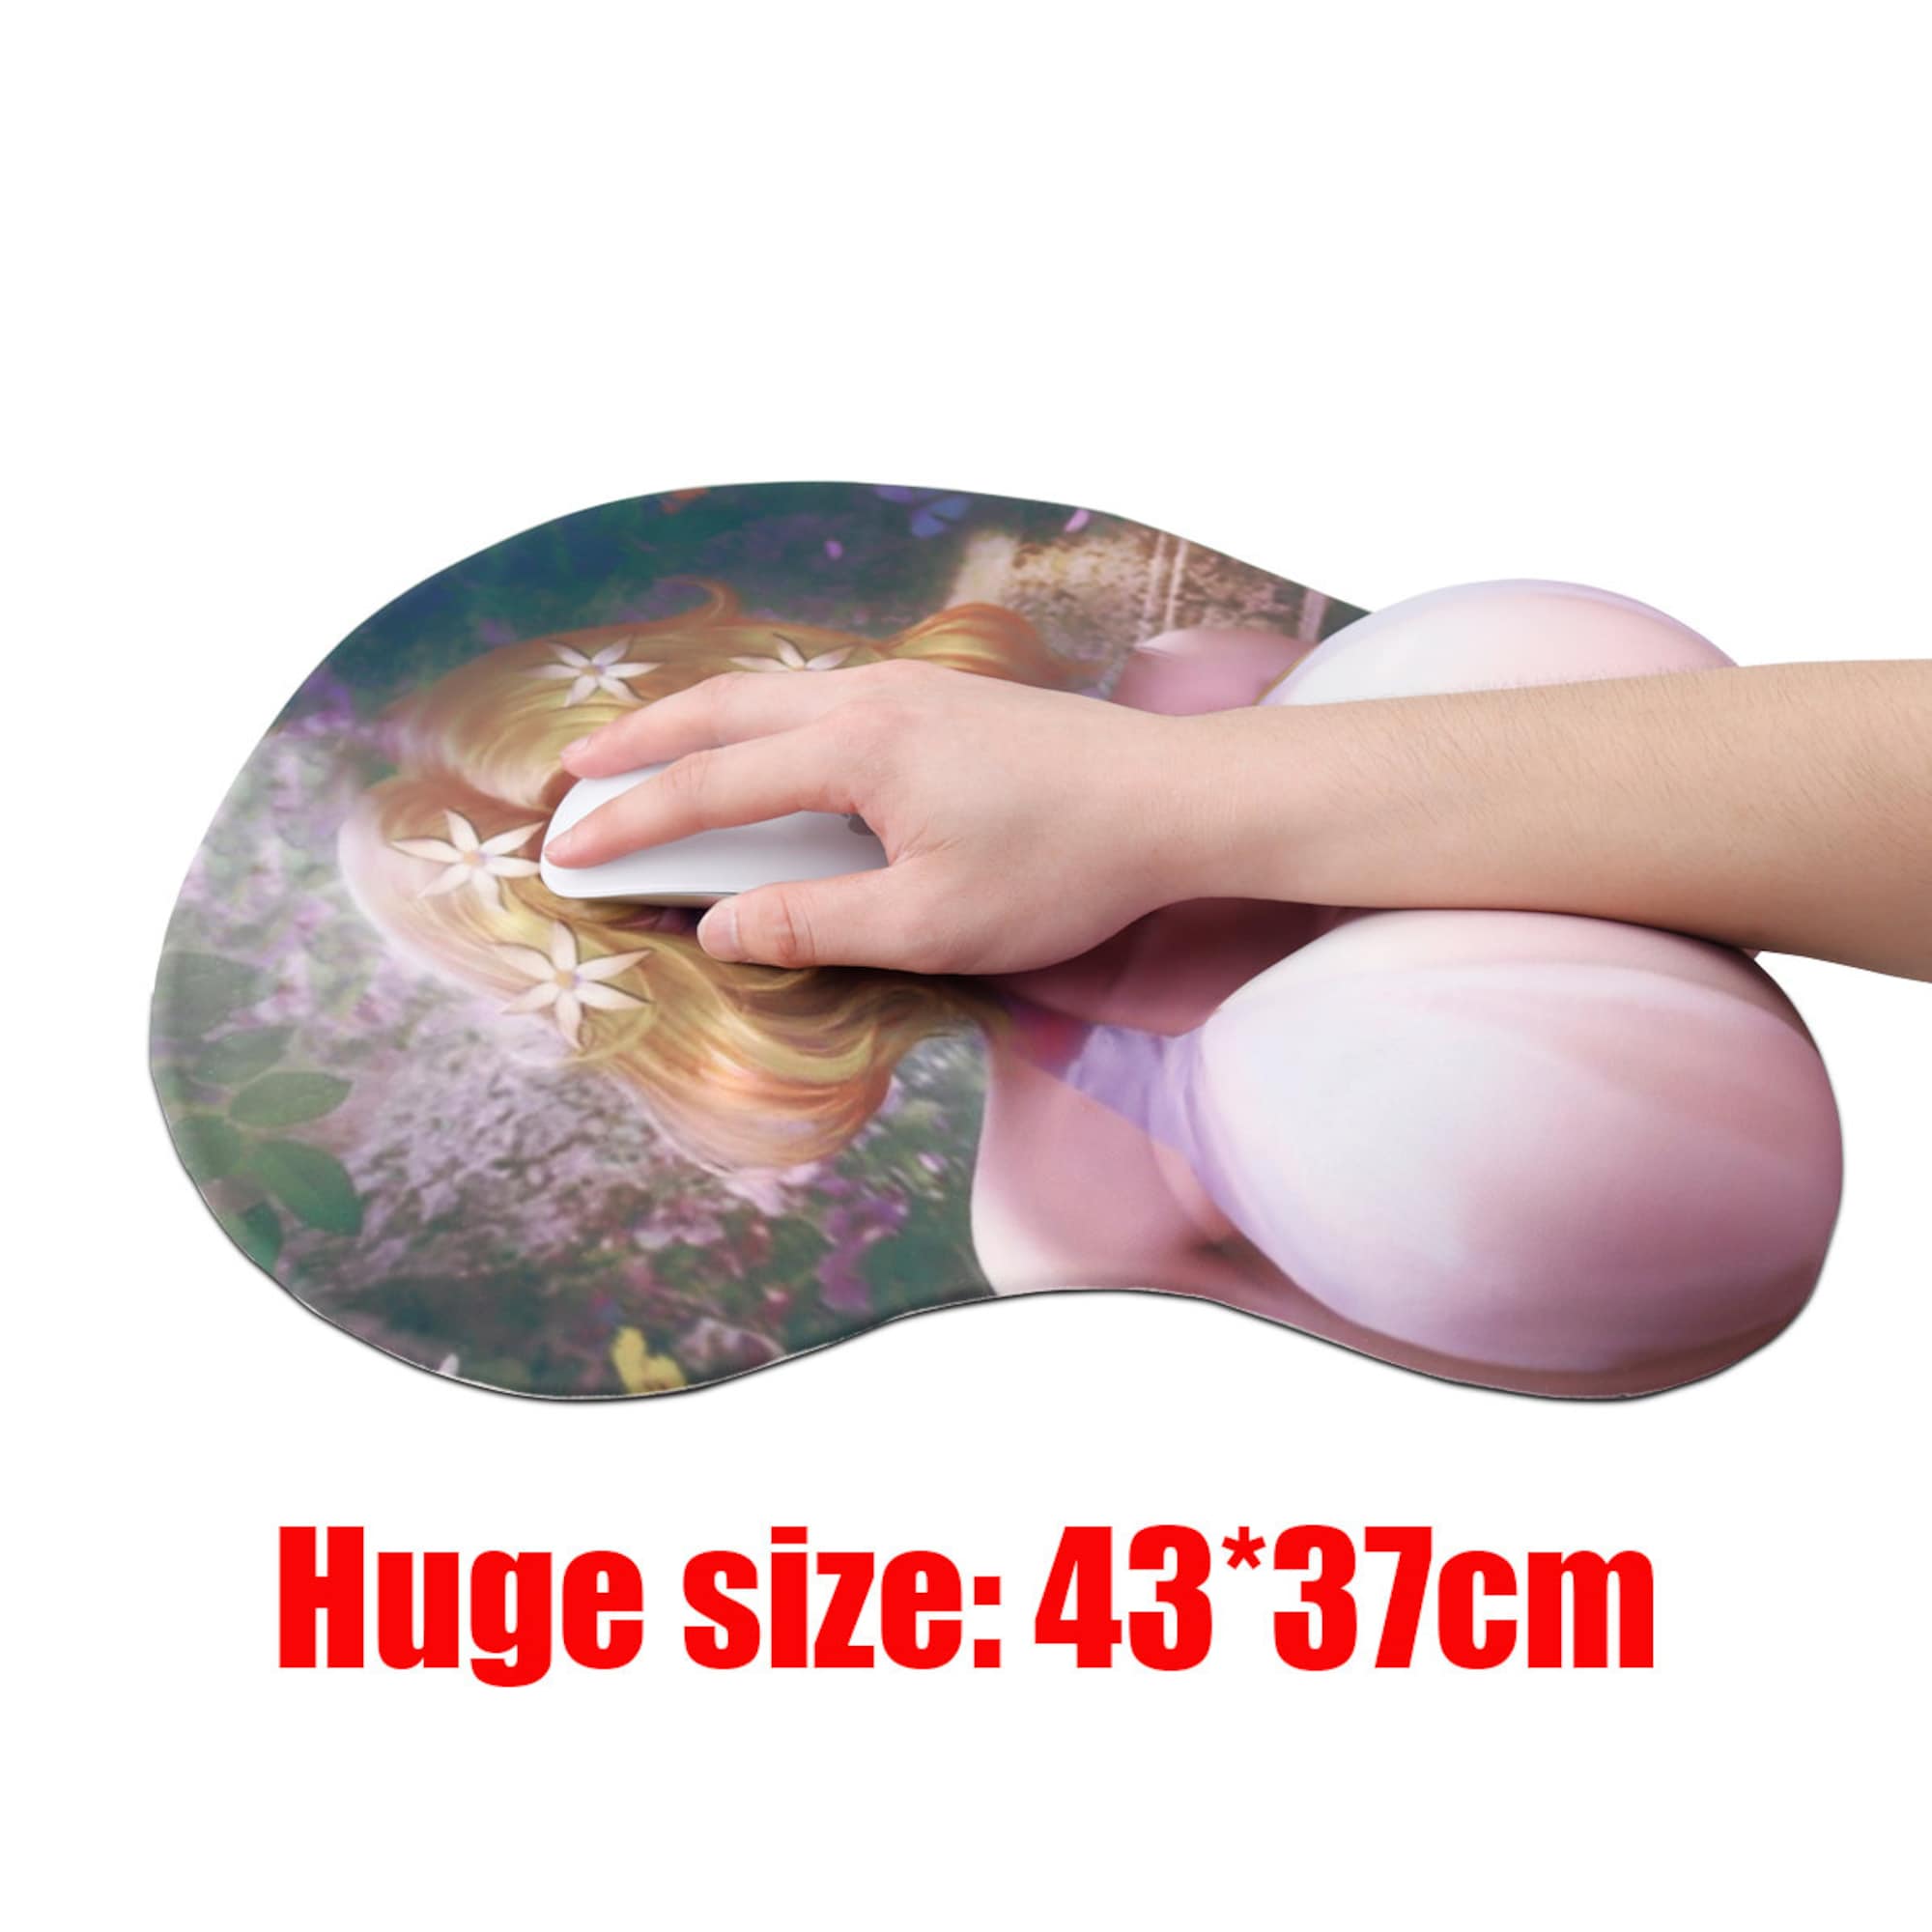 Anime Alcina Dimitrescu 3D Oppai Boob Mouse Pad Wrist Rest Gaming Play Mat Gift